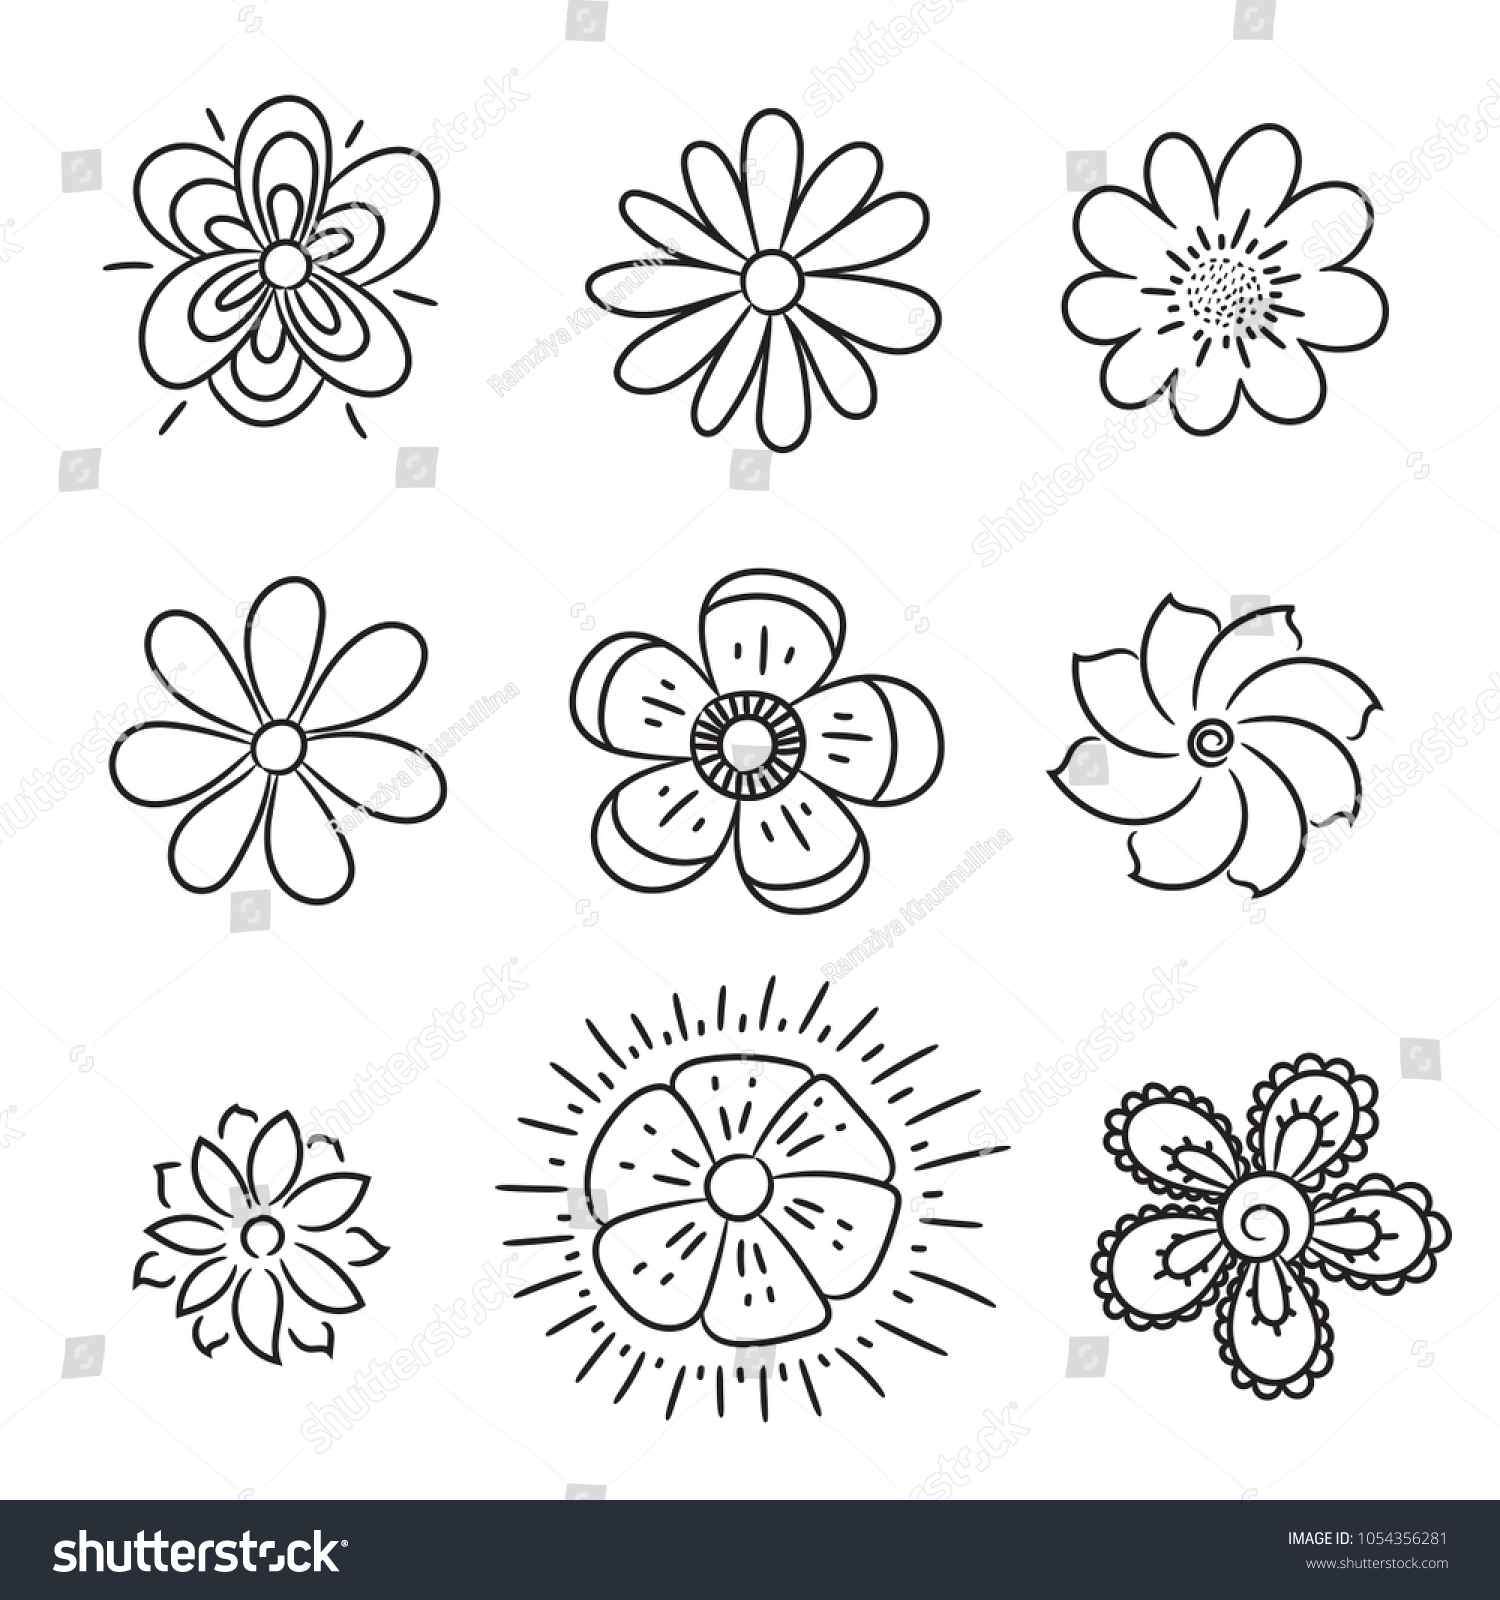 Doodle Flowers Set Hand Drawn Line Stock Vector (Royalty Free ...